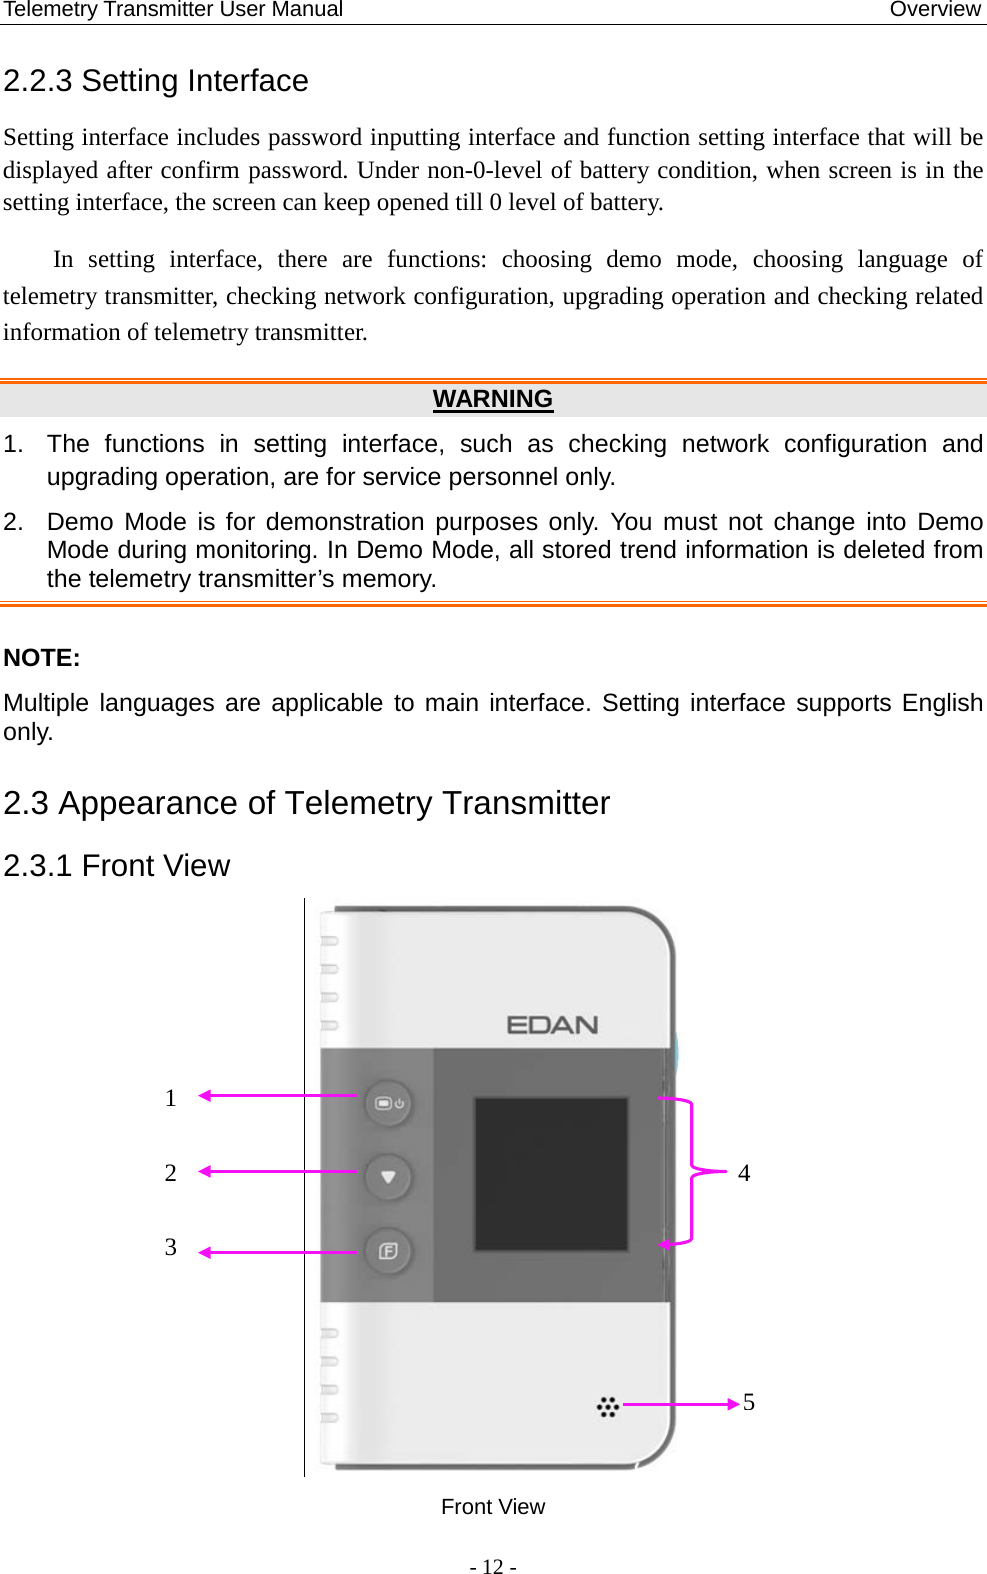 Telemetry Transmitter User Manual                                                  Overview 2.2.3 Setting Interface Setting interface includes password inputting interface and function setting interface that will be displayed after confirm password. Under non-0-level of battery condition, when screen is in the setting interface, the screen can keep opened till 0 level of battery. In setting interface, there are functions: choosing demo mode, choosing language of telemetry transmitter, checking network configuration, upgrading operation and checking related information of telemetry transmitter.   WARNING 1.  The  functions in setting interface, such as checking network configuration and upgrading operation, are for service personnel only. 2. Demo Mode is for demonstration purposes only. You must not change into Demo Mode during monitoring. In Demo Mode, all stored trend information is deleted from the telemetry transmitter’s memory.    NOTE: Multiple languages are applicable to main interface. Setting interface supports English only. 2.3 Appearance of Telemetry Transmitter 2.3.1 Front View   Front View 1   2   3 4 5  - 12 - 